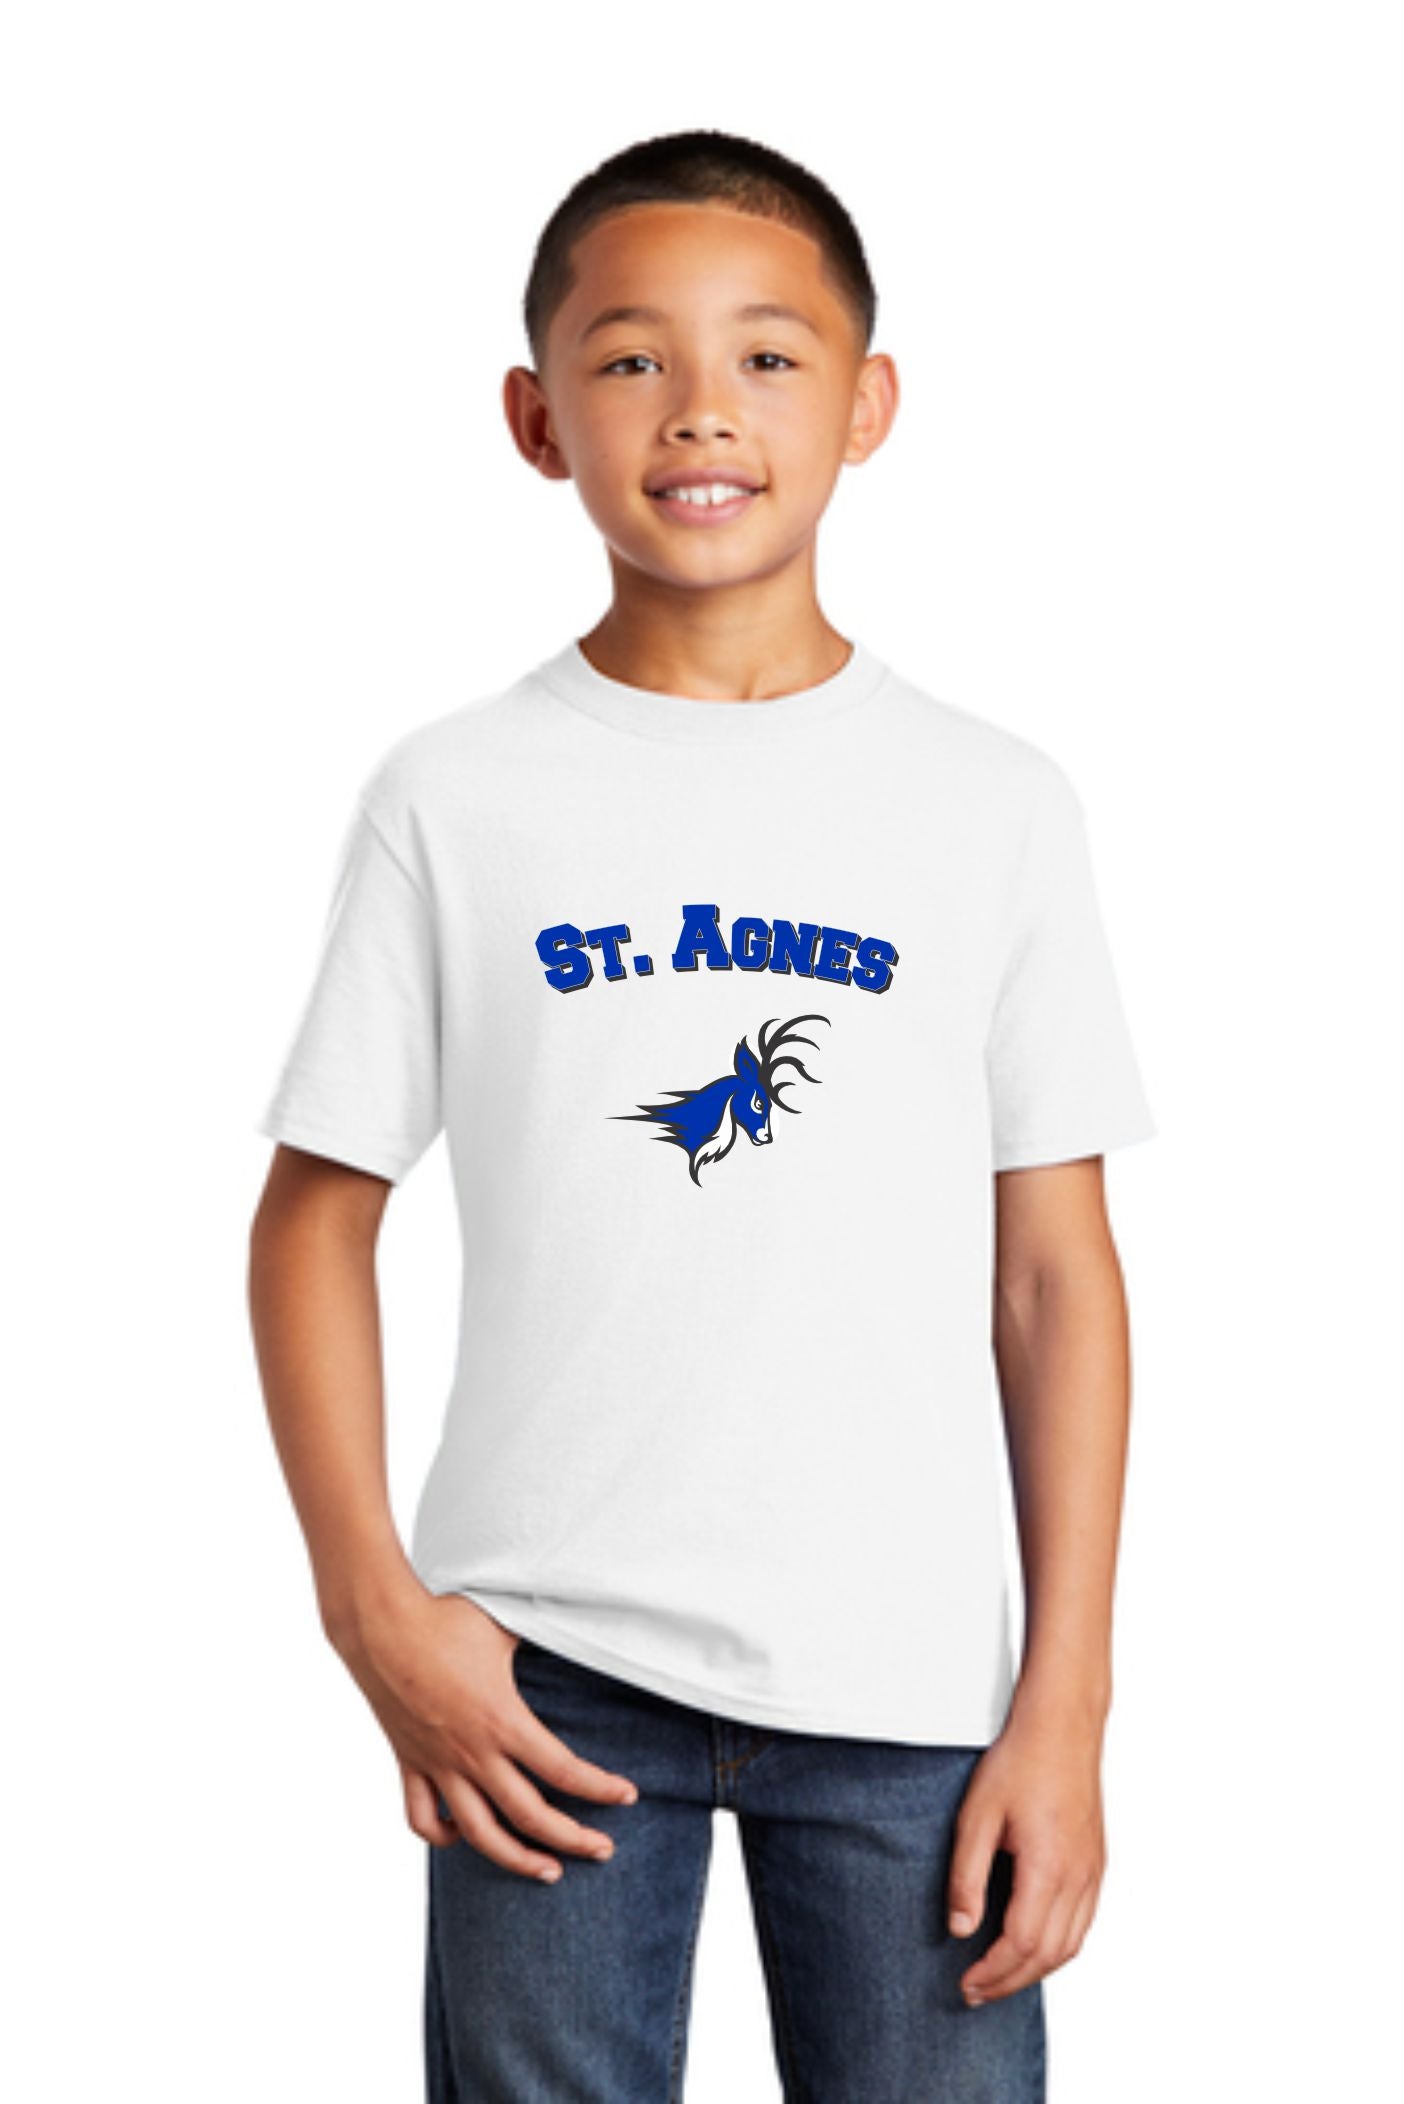 Saint Agnes Youth and Adult T-shirts